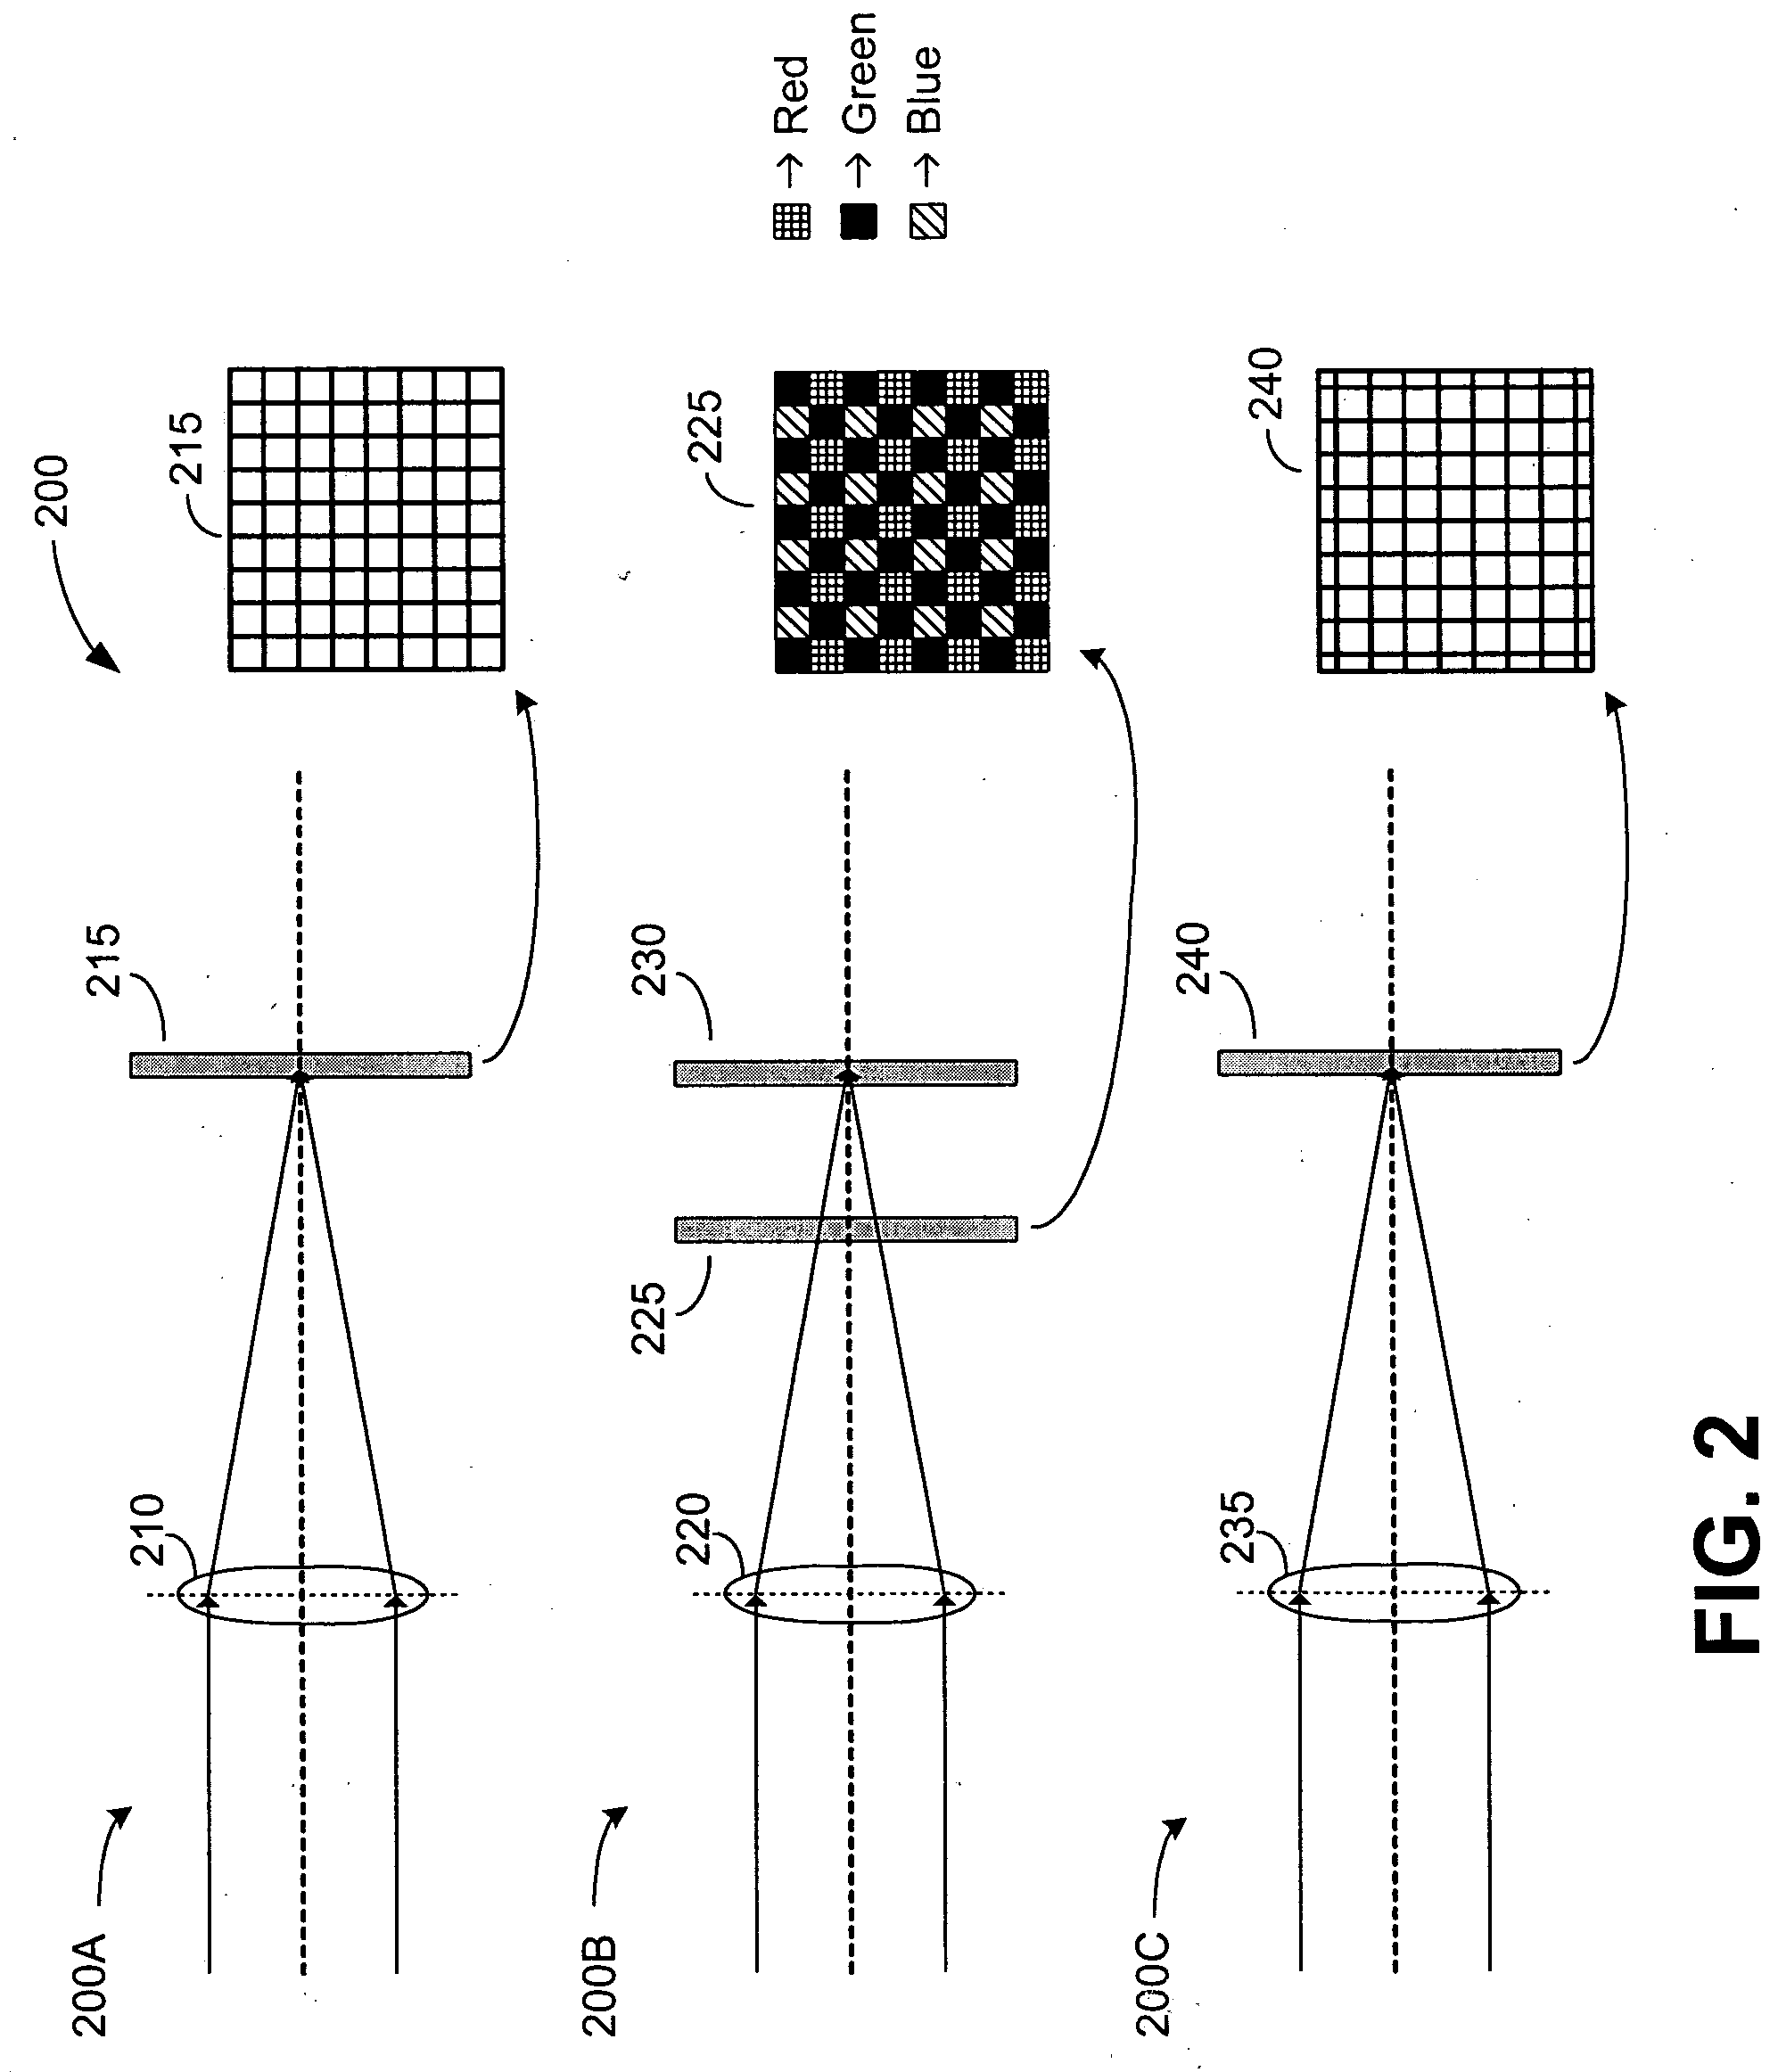 Multi-lens imaging systems and methods